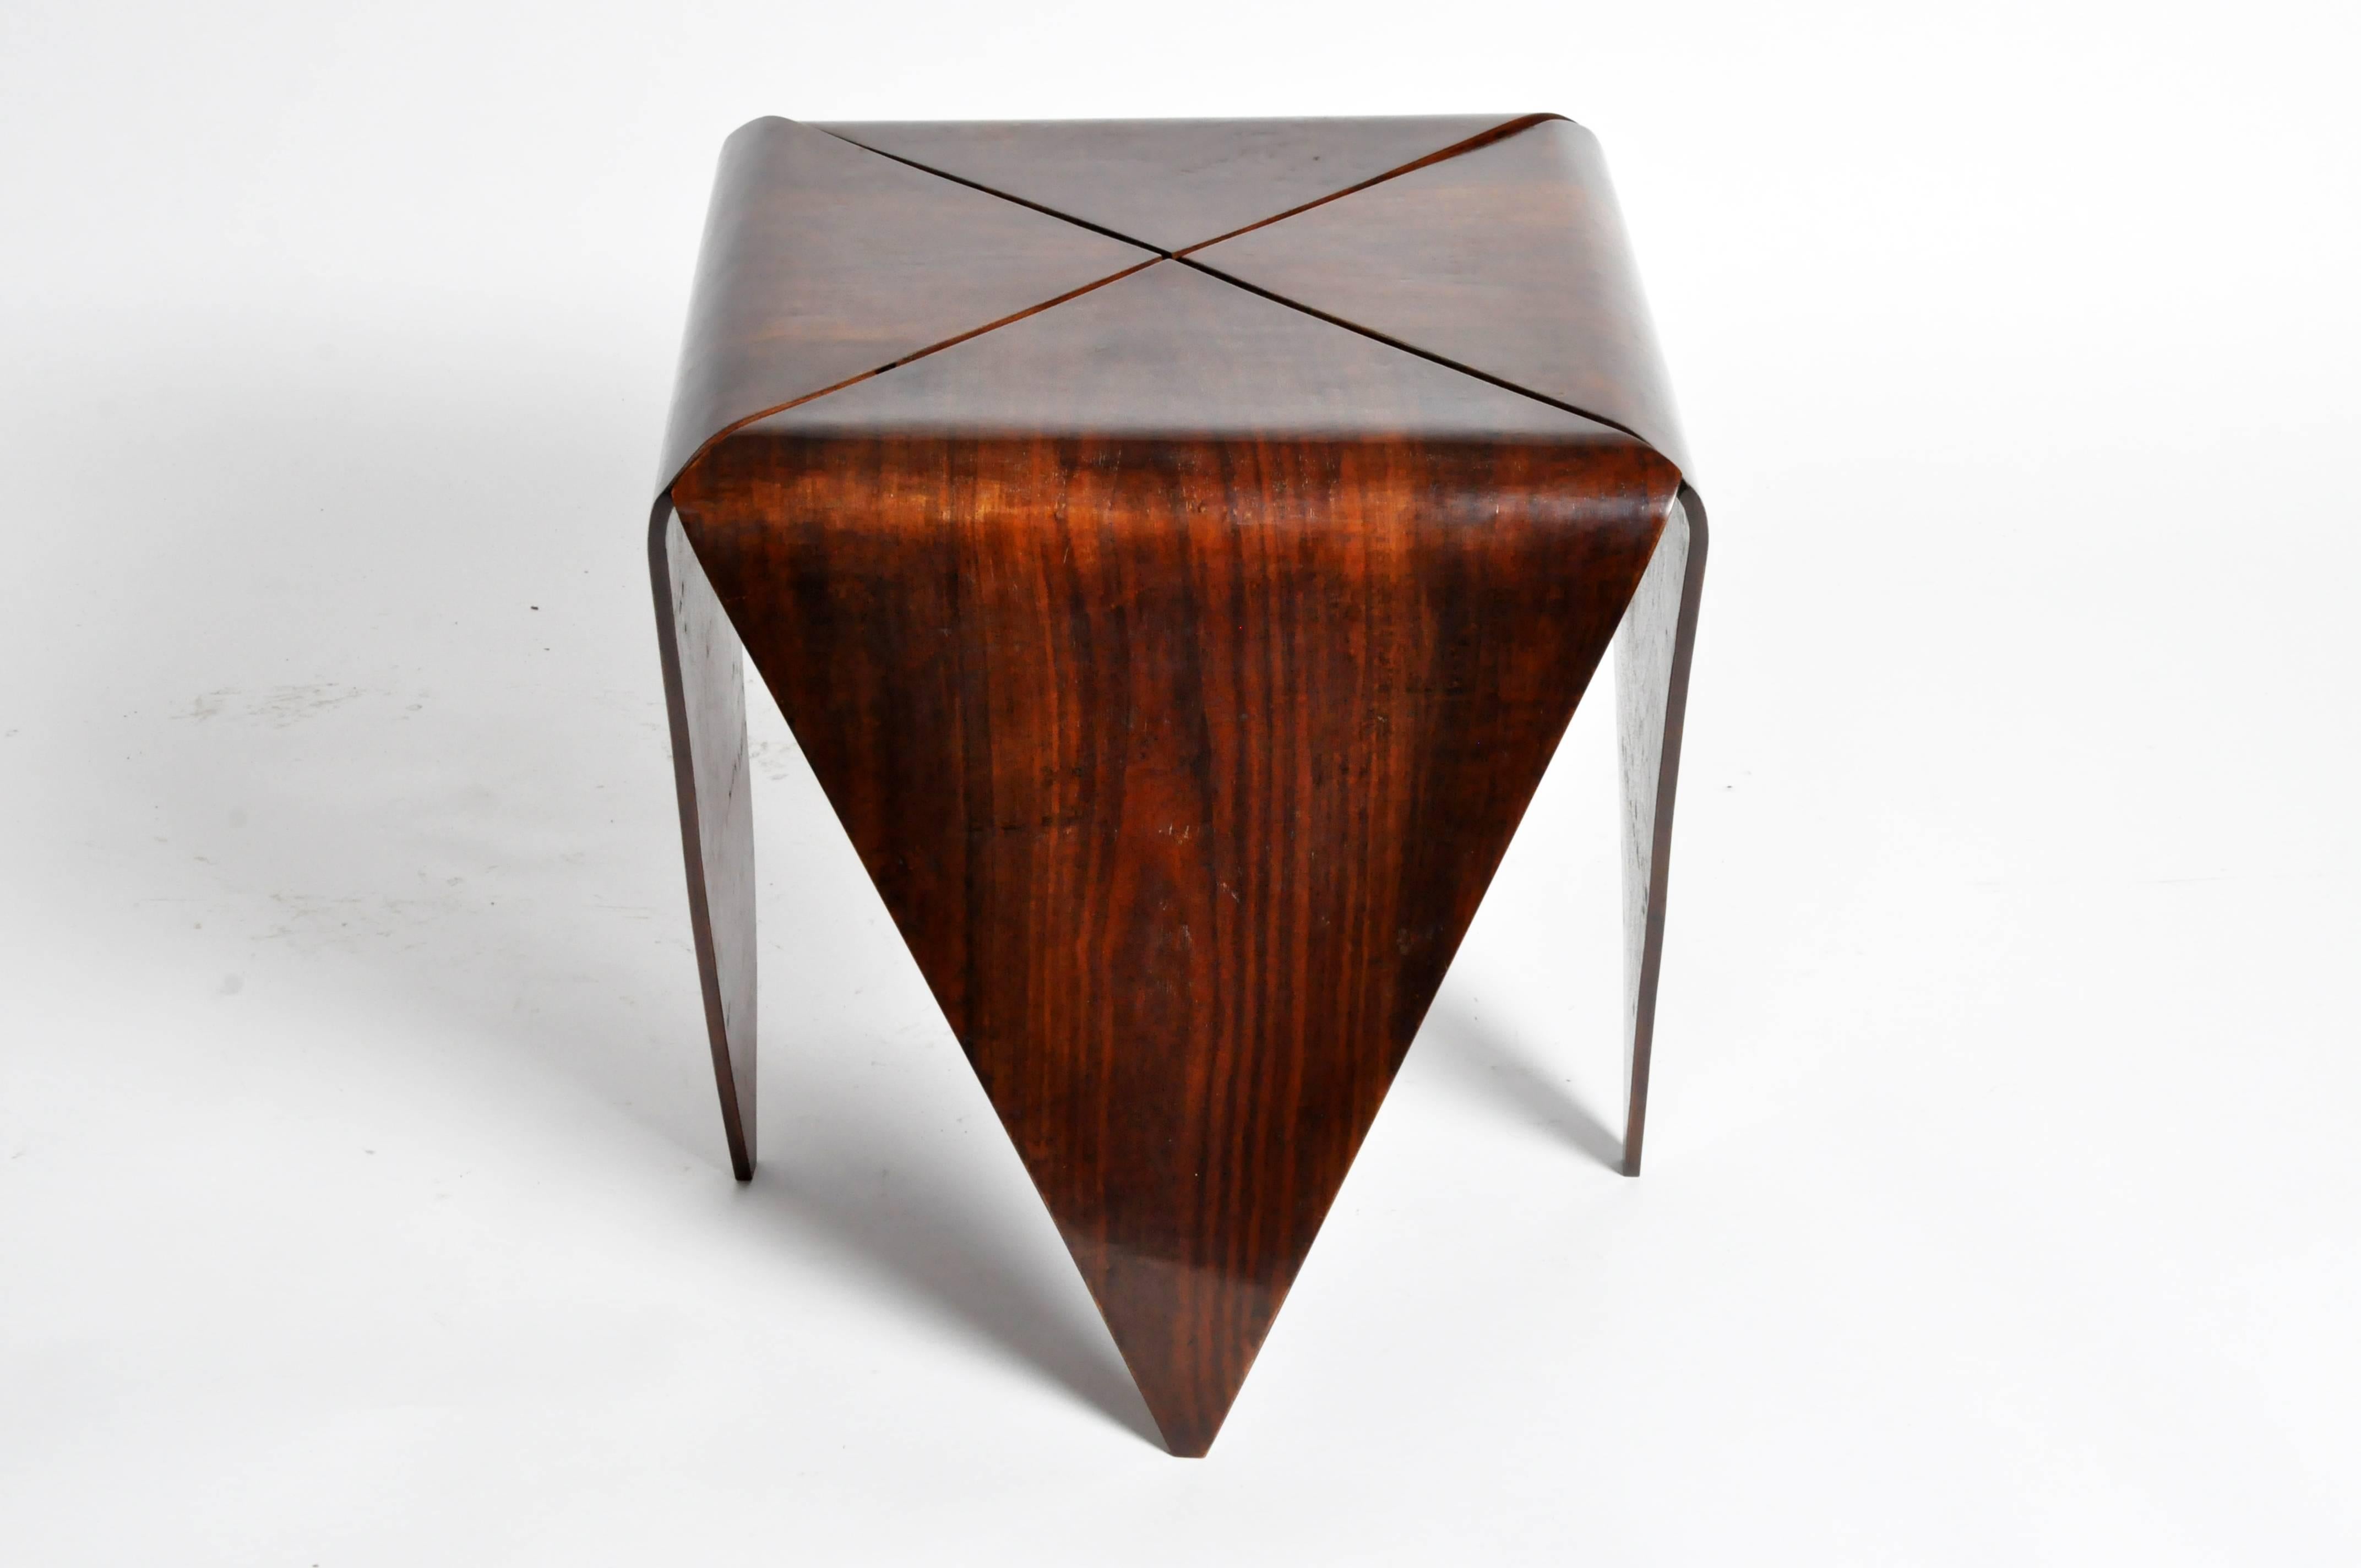 Table designed by celebrated architect and designer Jorge Zalszupin. In the 1950s Jorge Zalszupin founded L'Atelier, a furniture design manufacturer in Sao Paulo, Brazil. Zalszupin's one-off designs were included by Oscar Niemeyer in the Palácio da